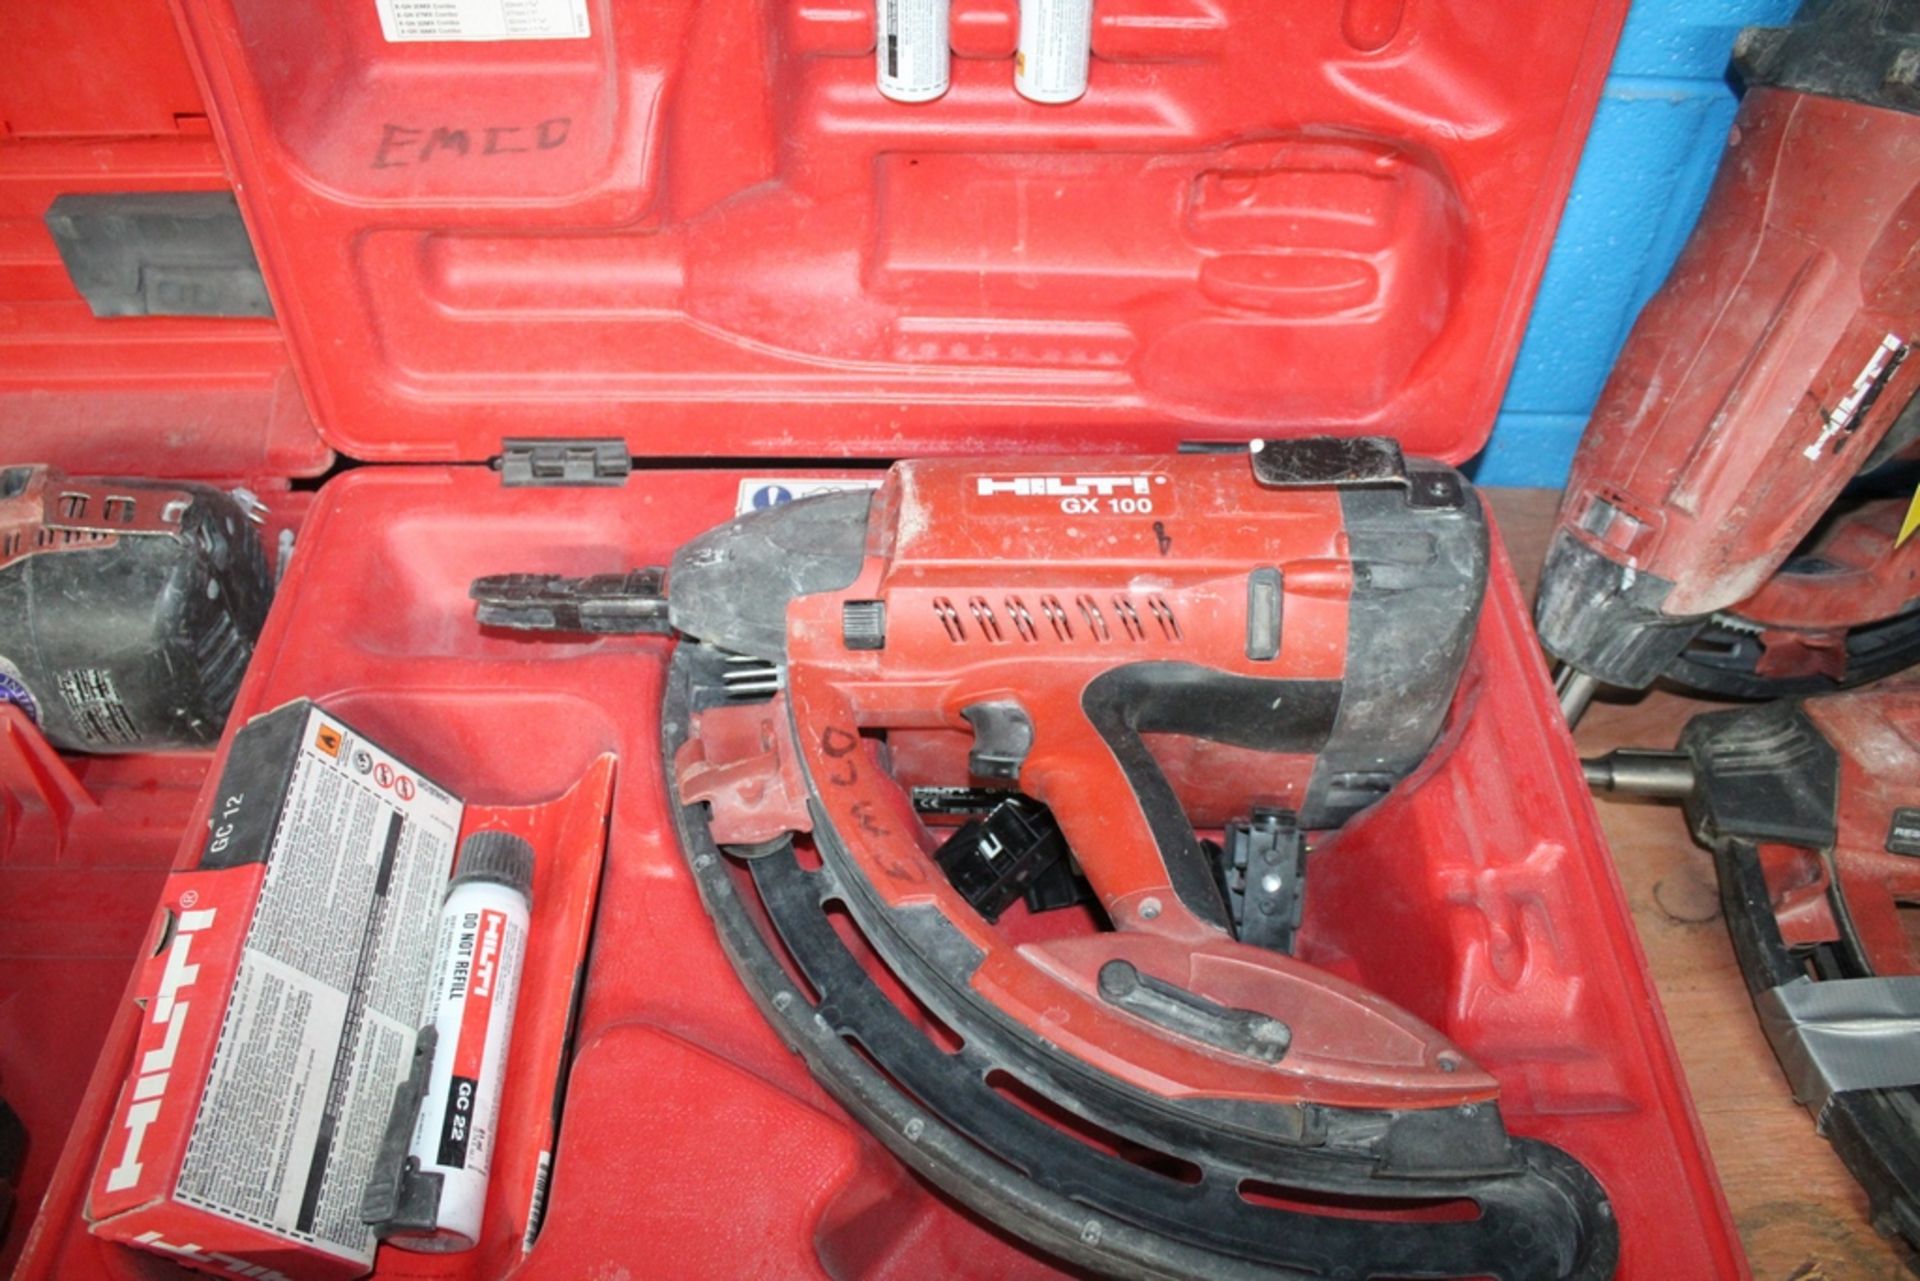 HILTI MODEL GX100 GAS ACTUATED NAIL GUN WITH CASE